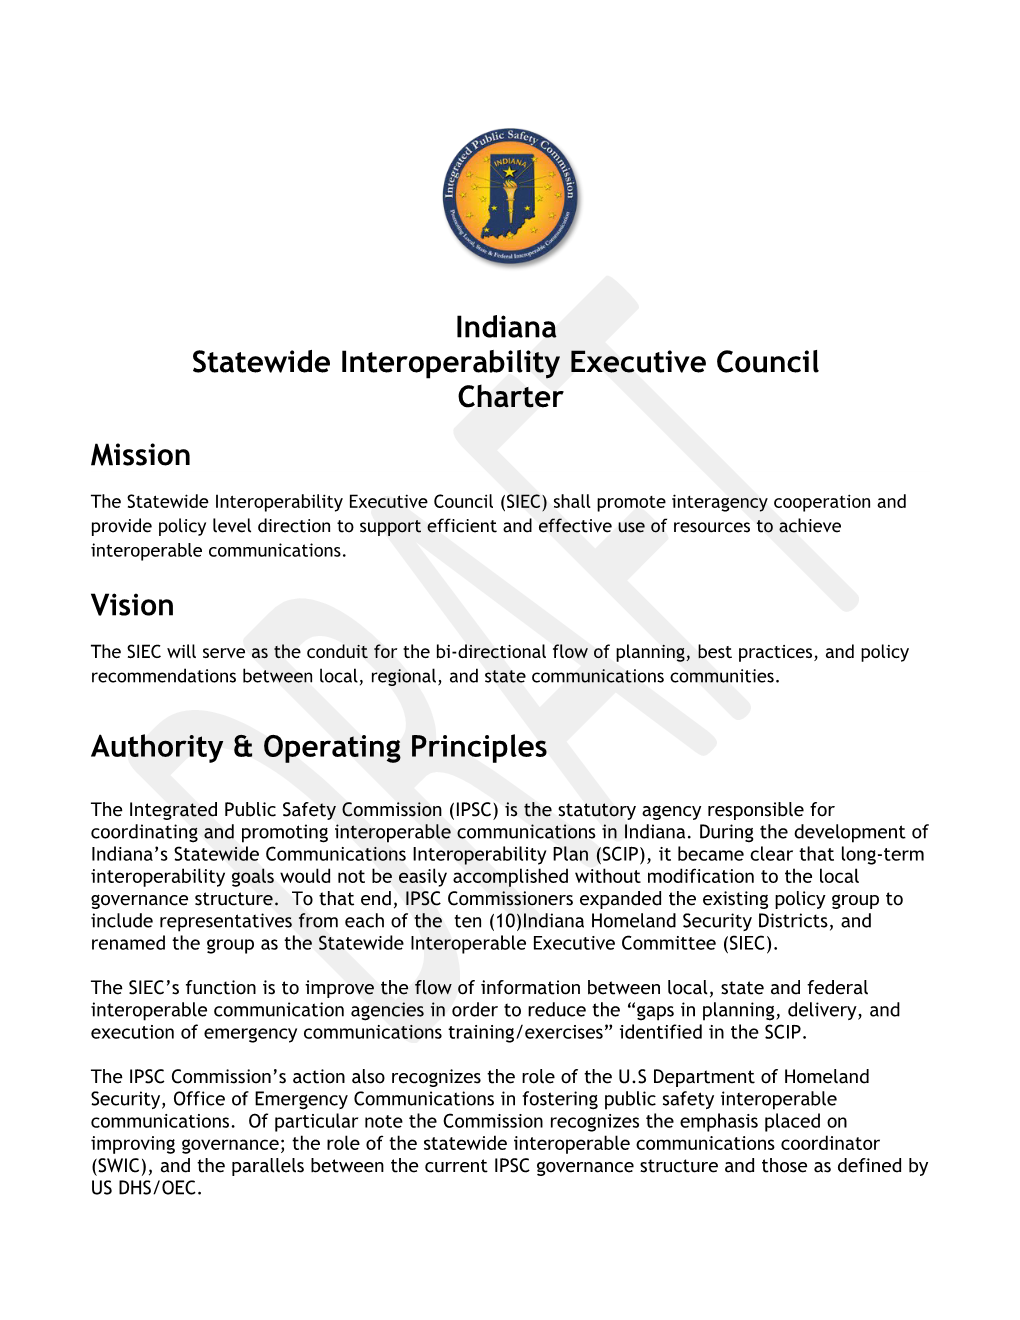 Statewide Interoperability Executive Council